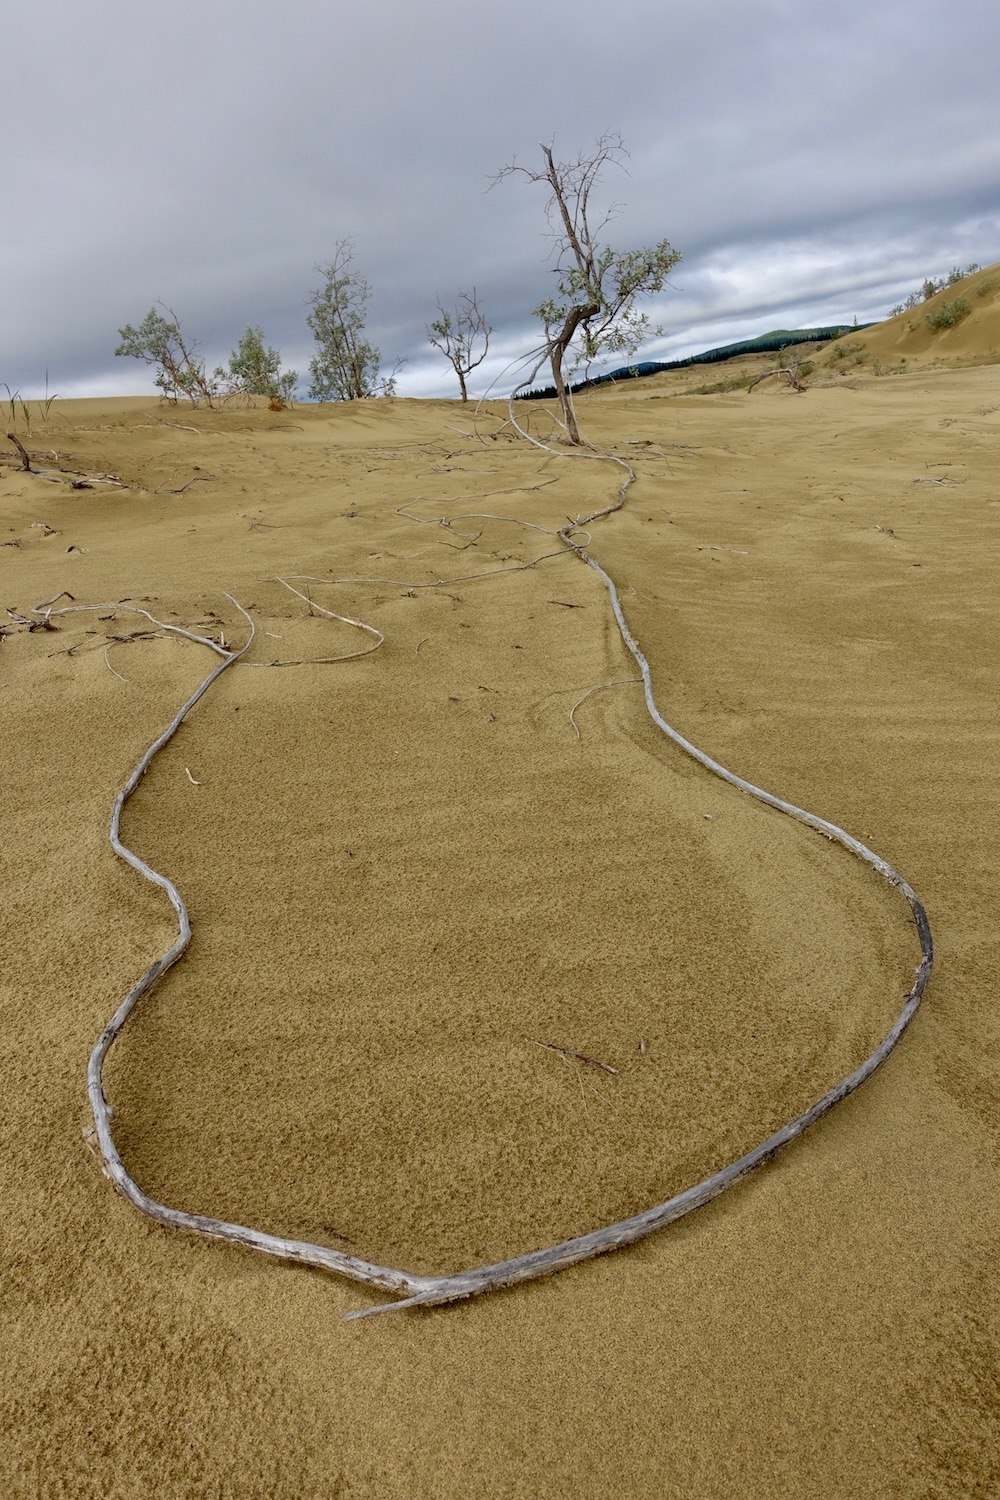 A root forms a u-shaped loop on sand.